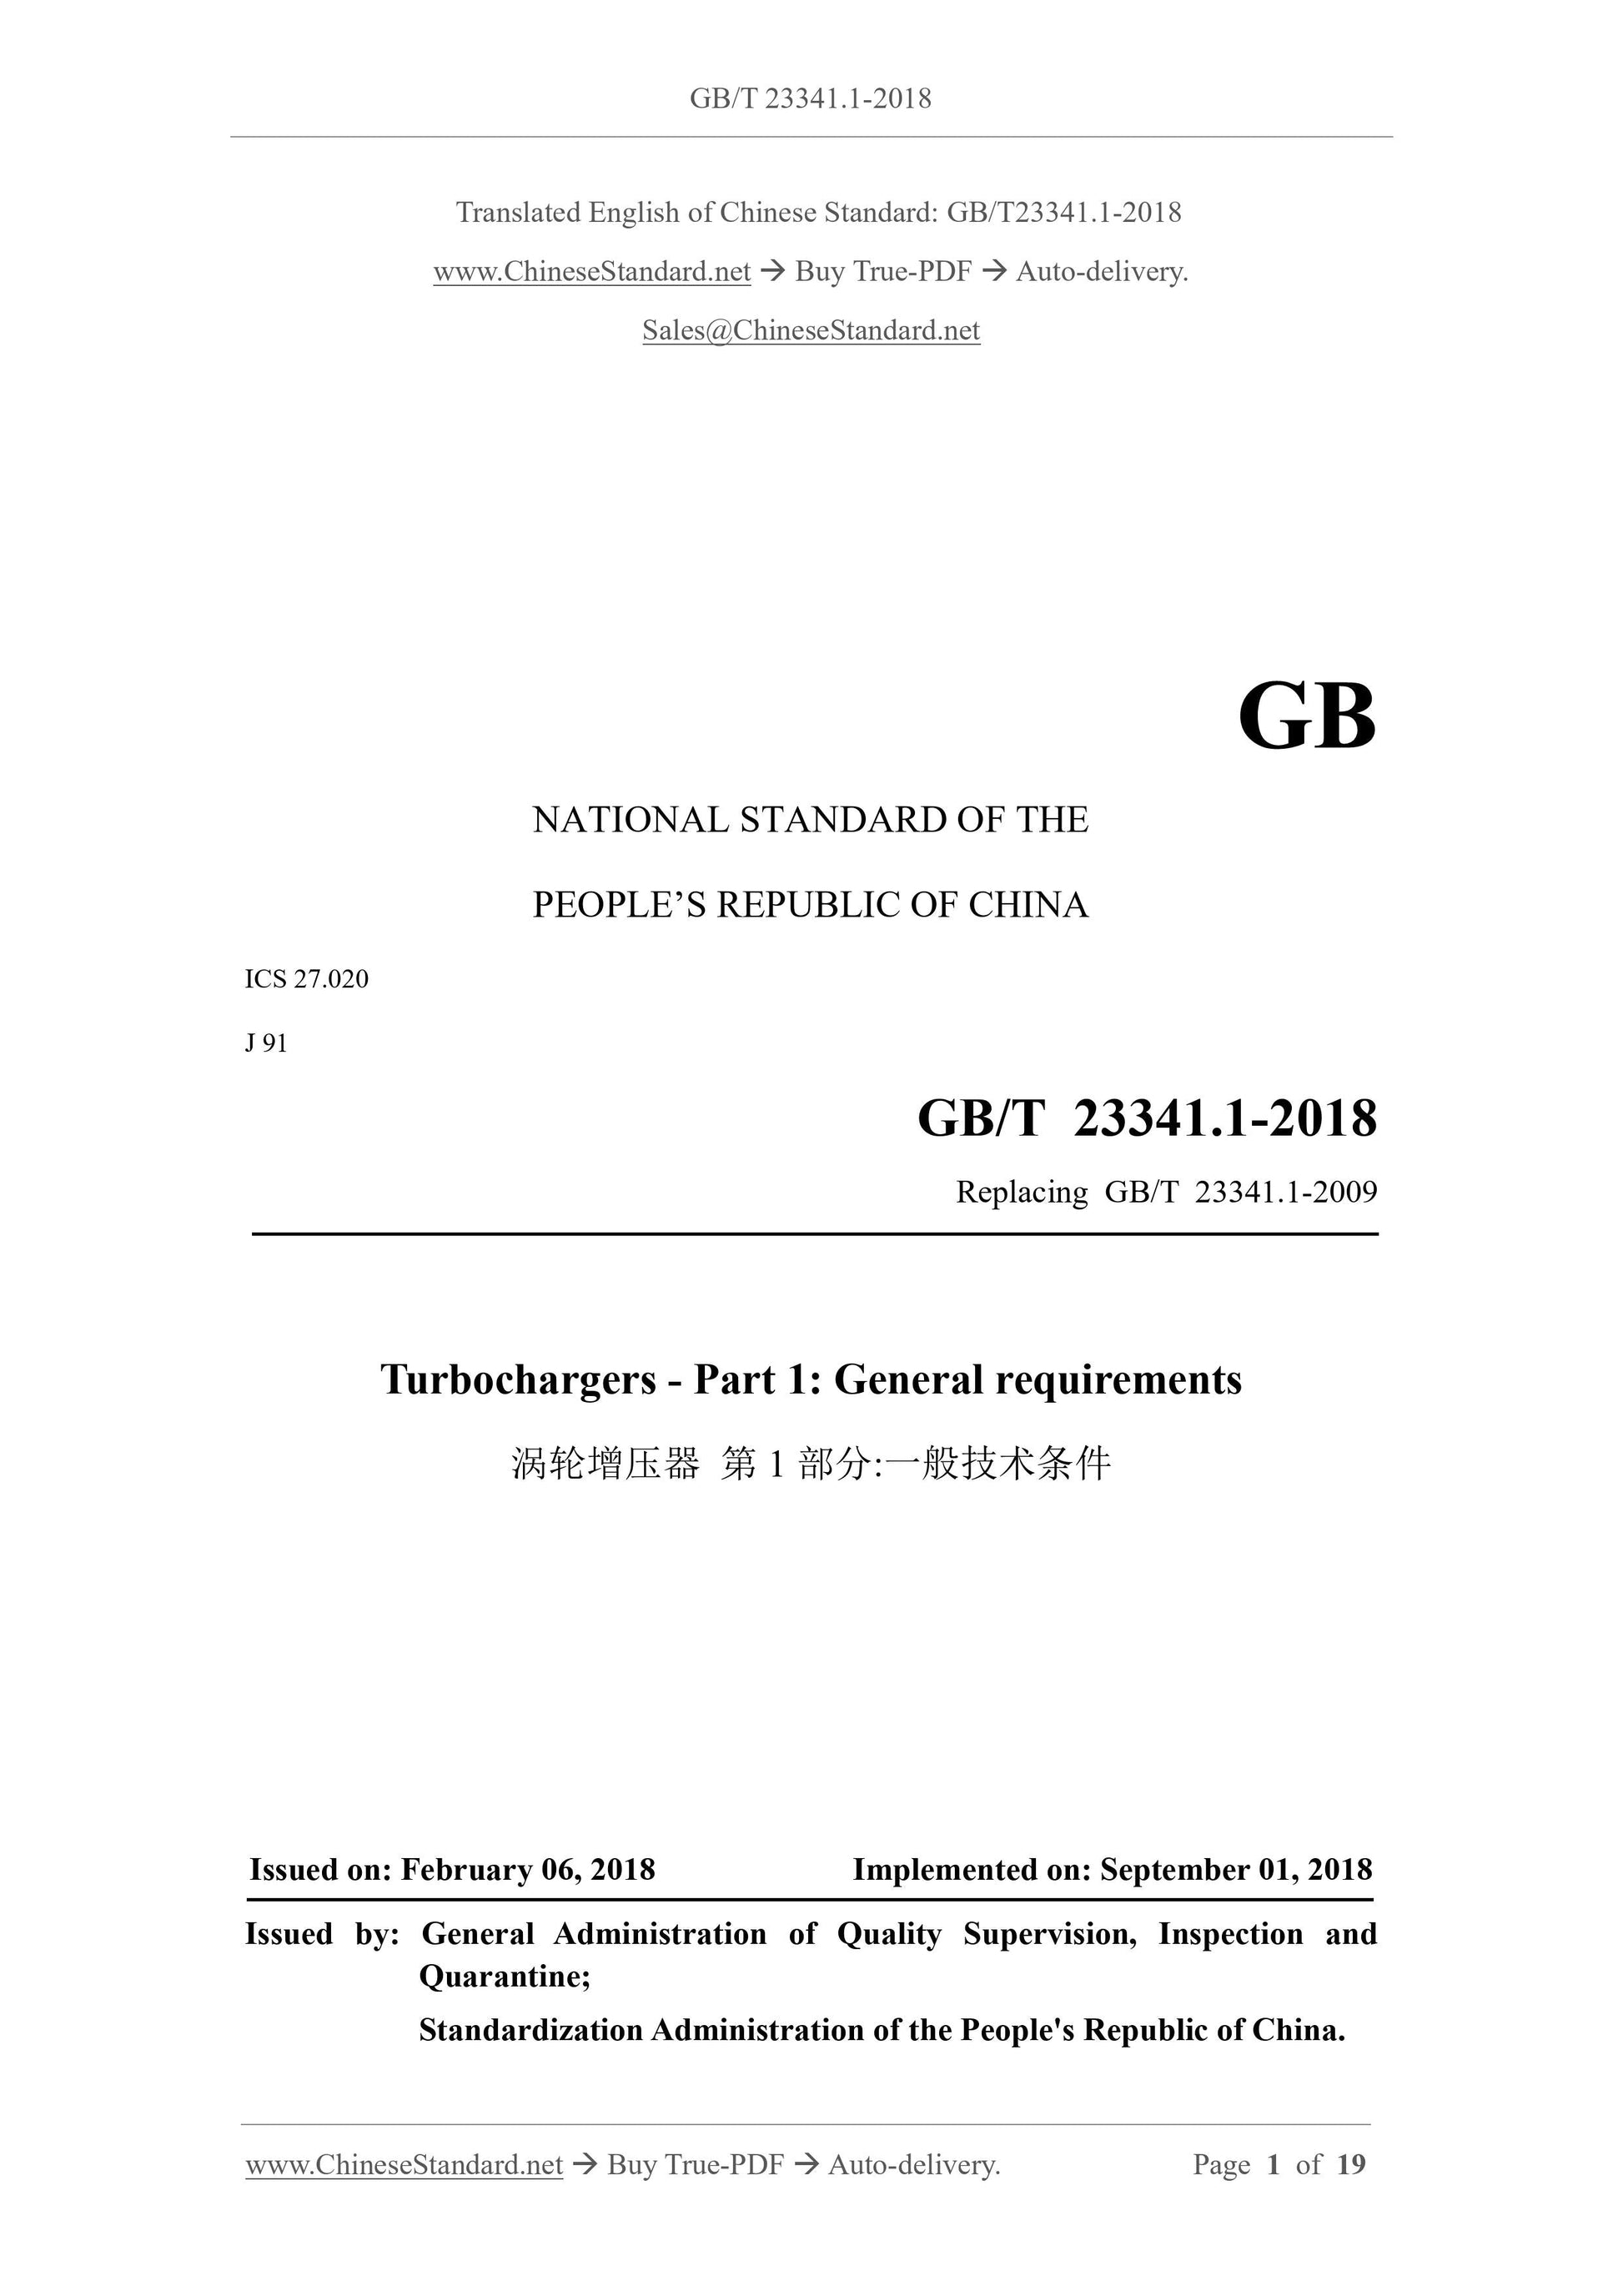 GB/T 23341.1-2018 Page 1